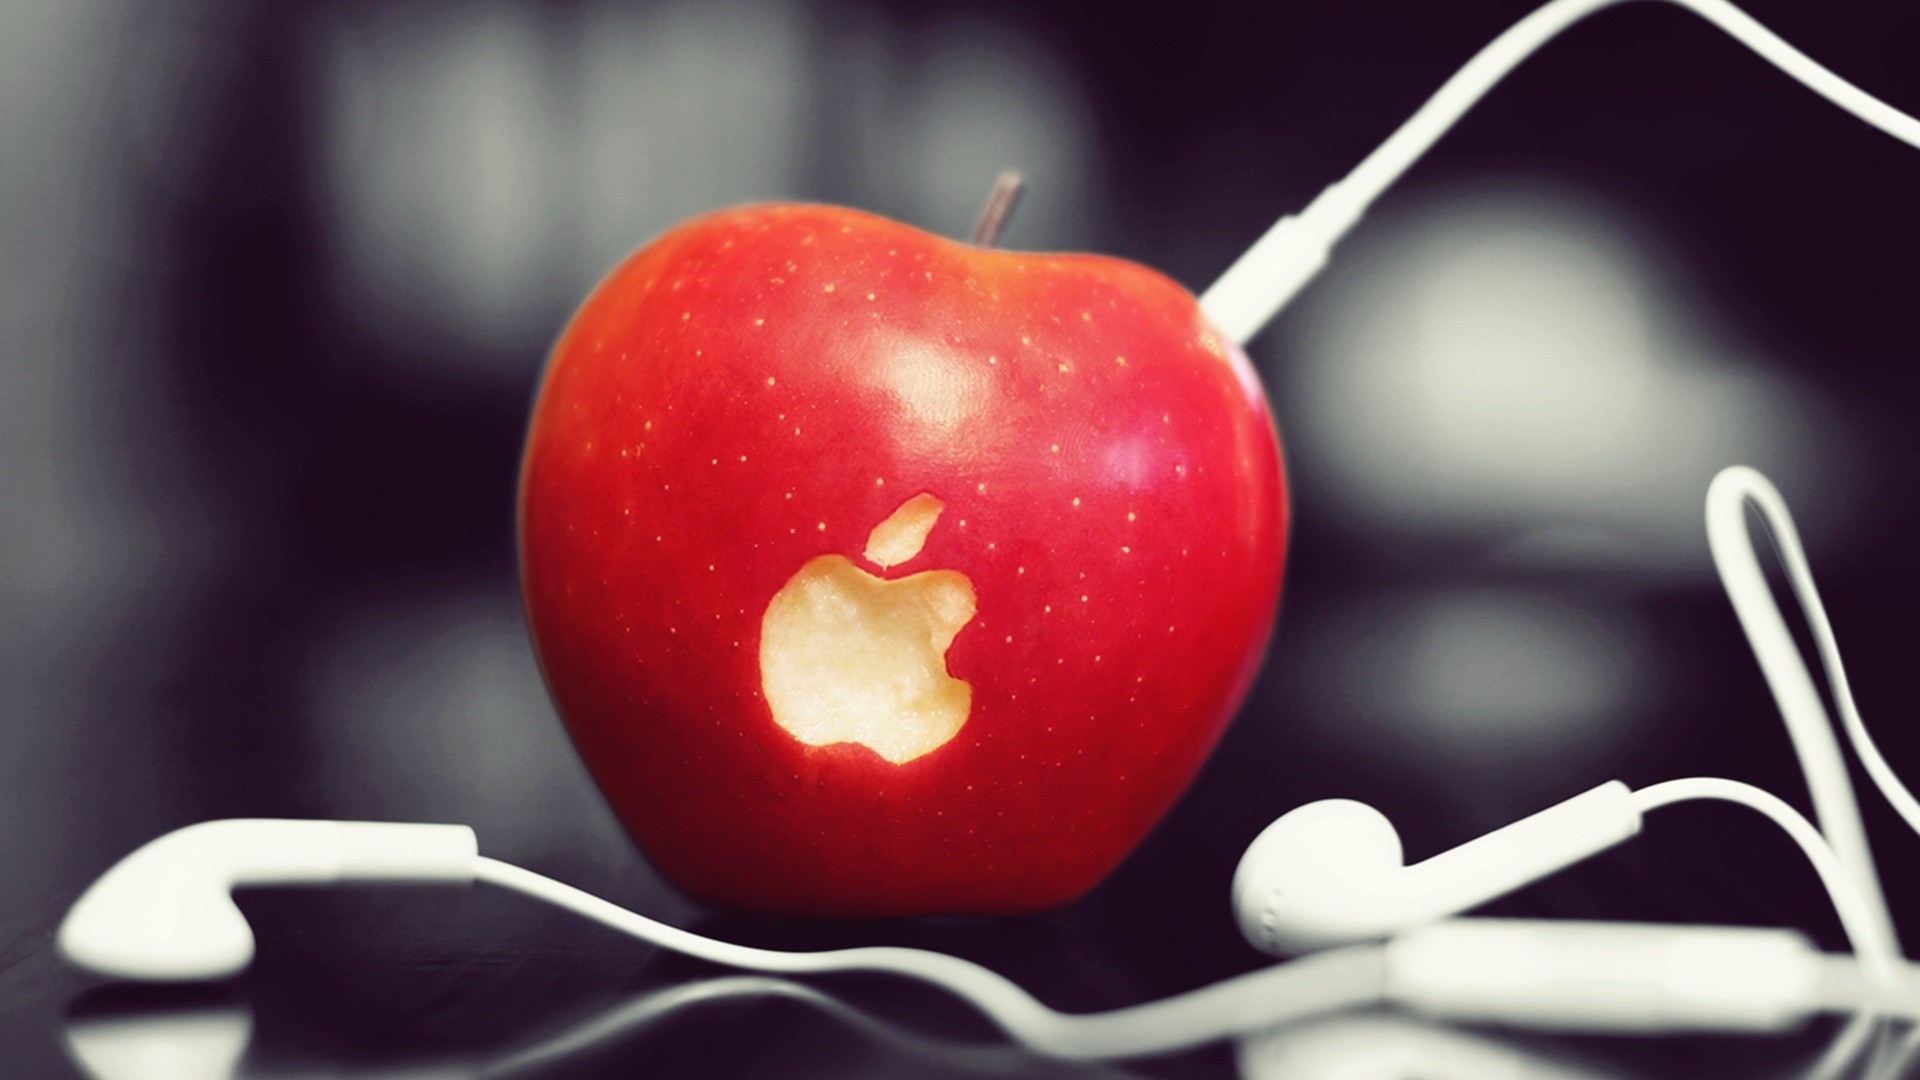 apples, food, apple, objects, red UHD